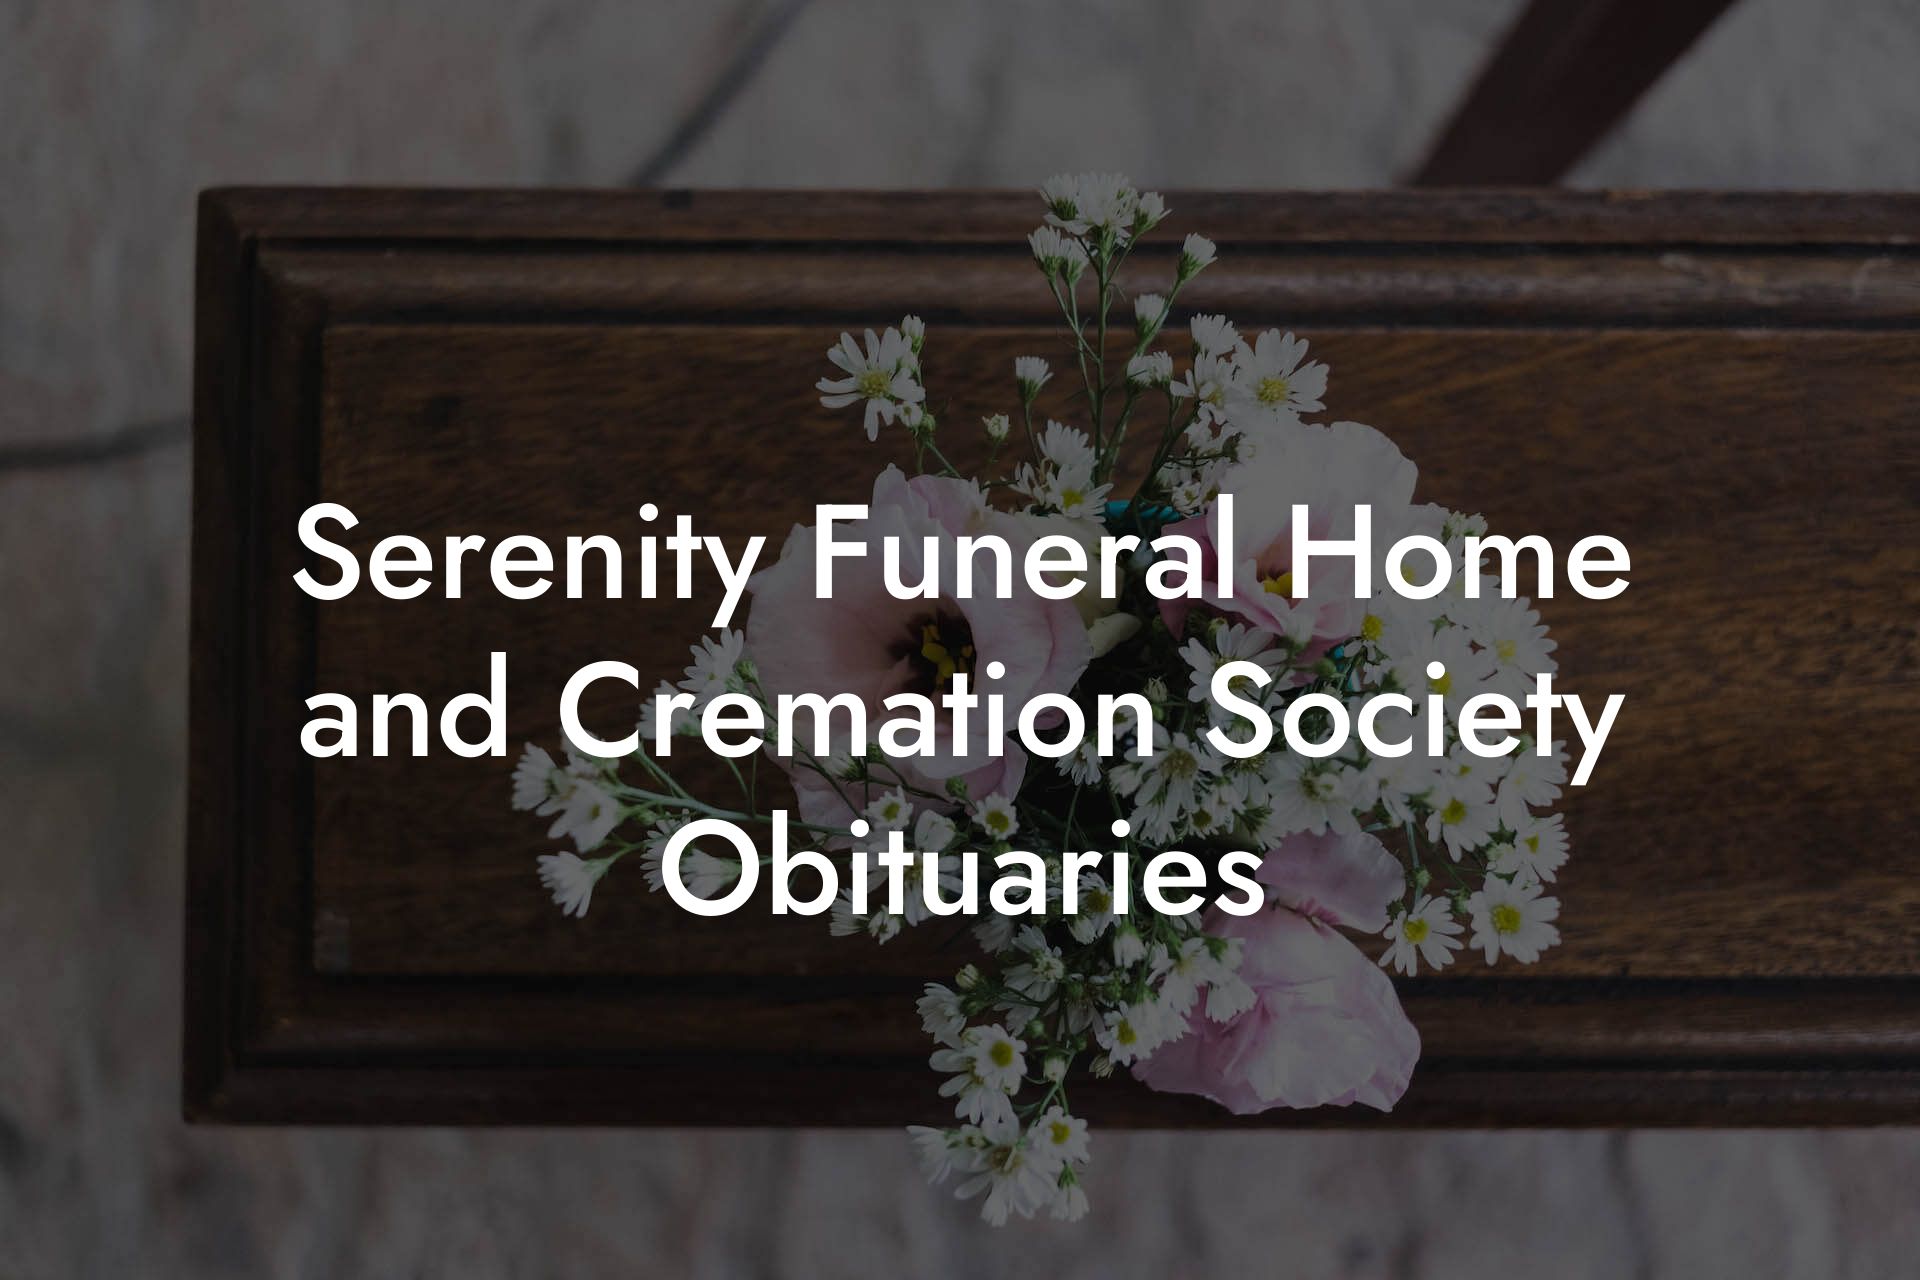 Serenity Funeral Home and Cremation Society Obituaries